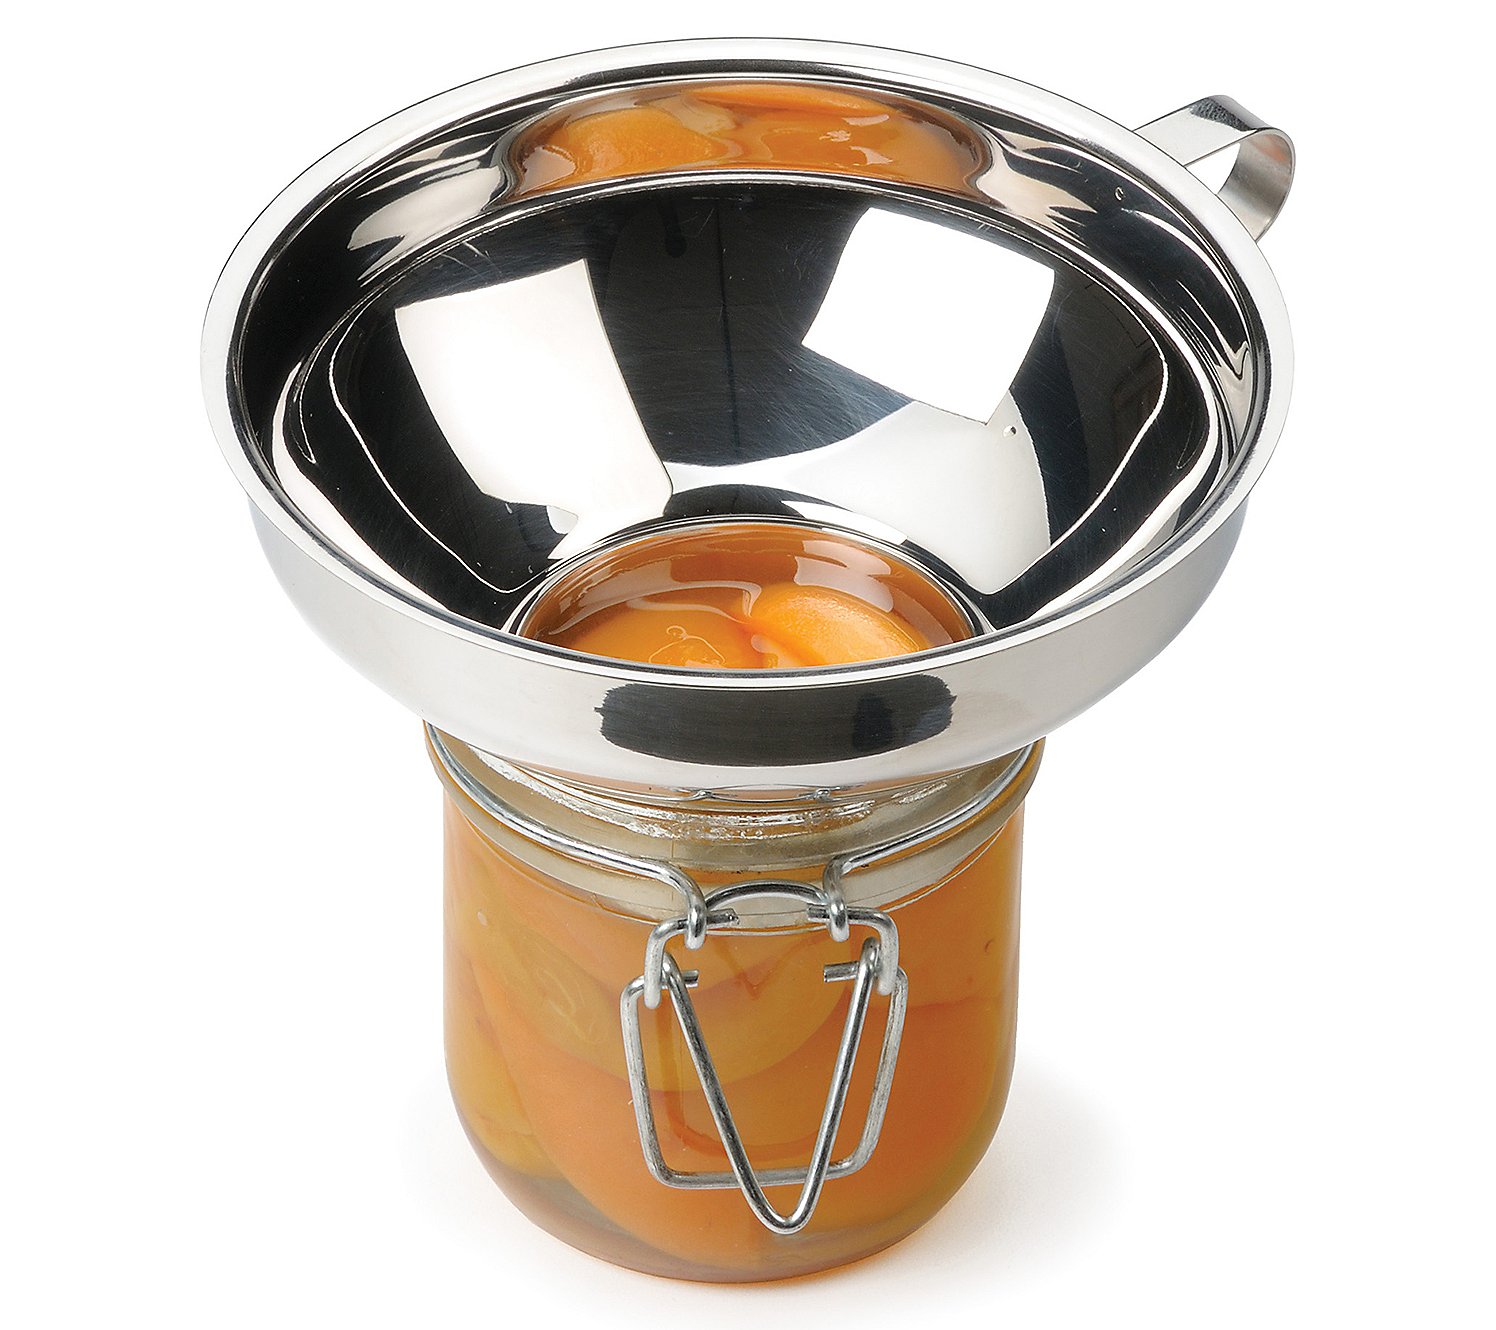 RSVP Stainless Steel Canning Funnel